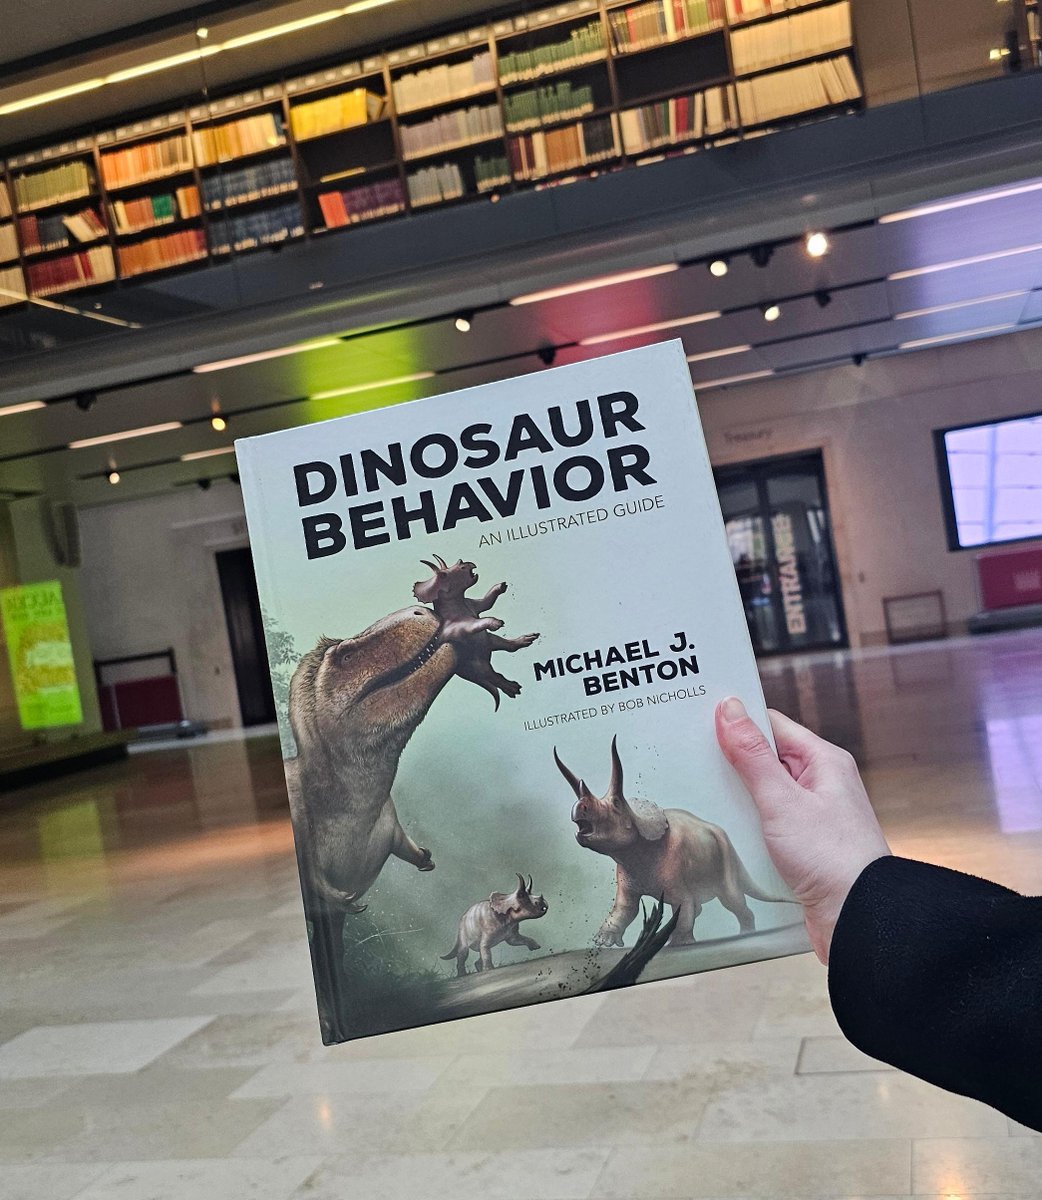 Today, world-renowned palaeontologist Michael Benton will be @oxfordlitfest discussing Dinosaur Behaviour. Learn more: hubs.ly/Q02nMBvR0 #Paleontology #Dinosaurs